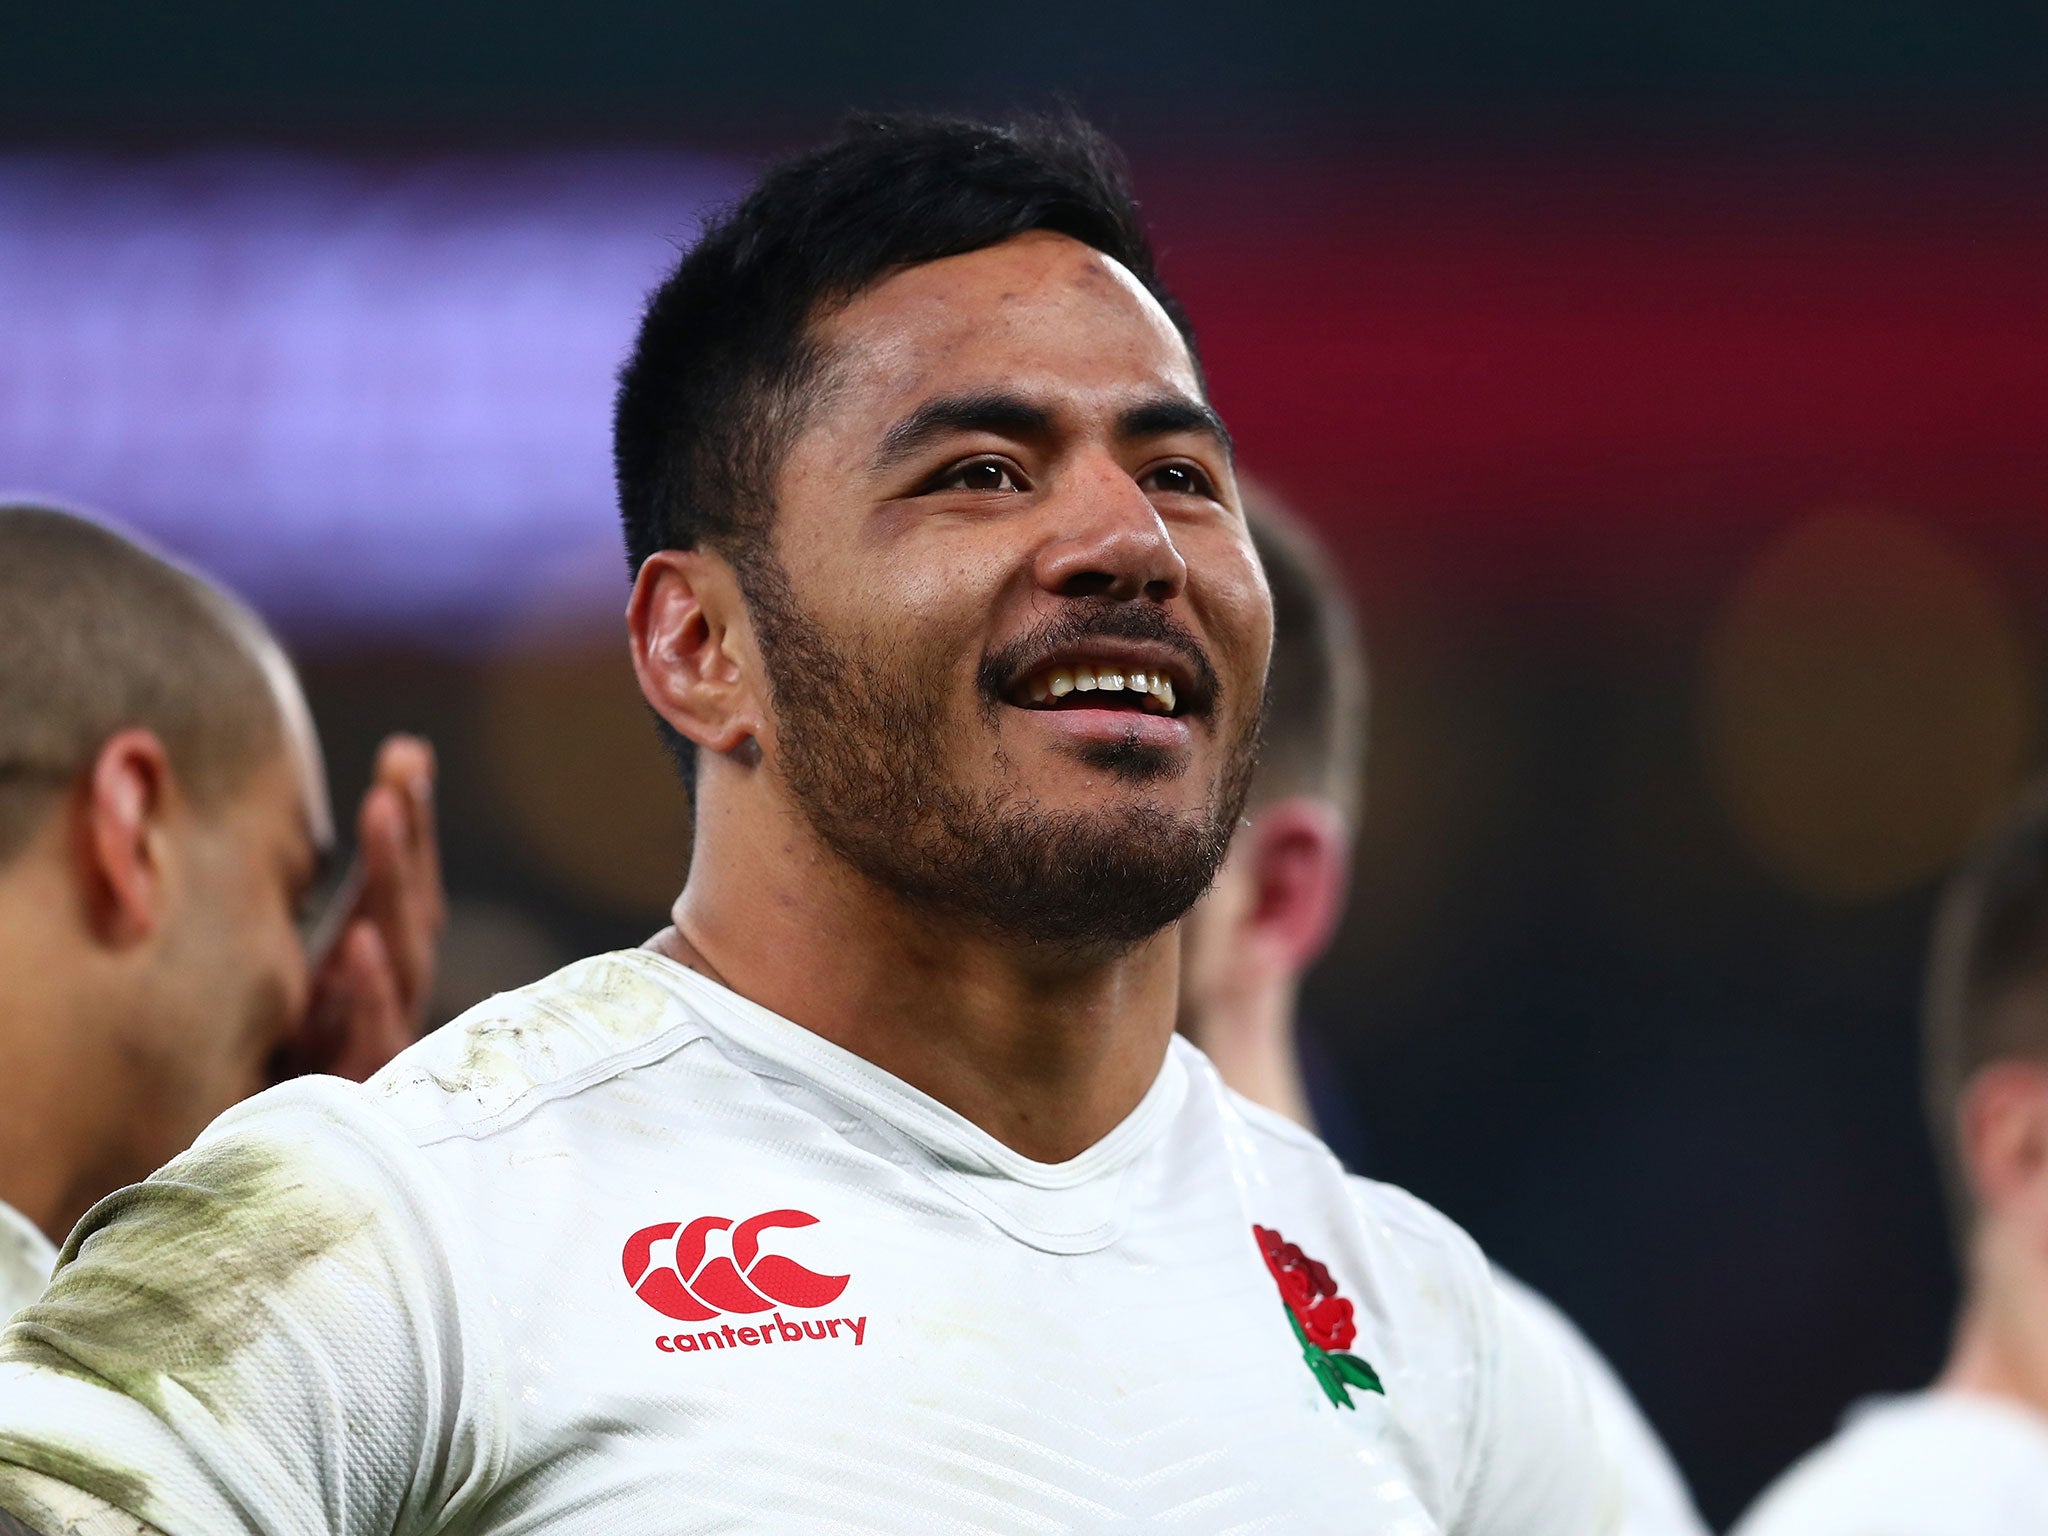 Manu Tuilagi has been backed by Eddie Jones to help 'destroy' New Zealand at the Rugby World Cup